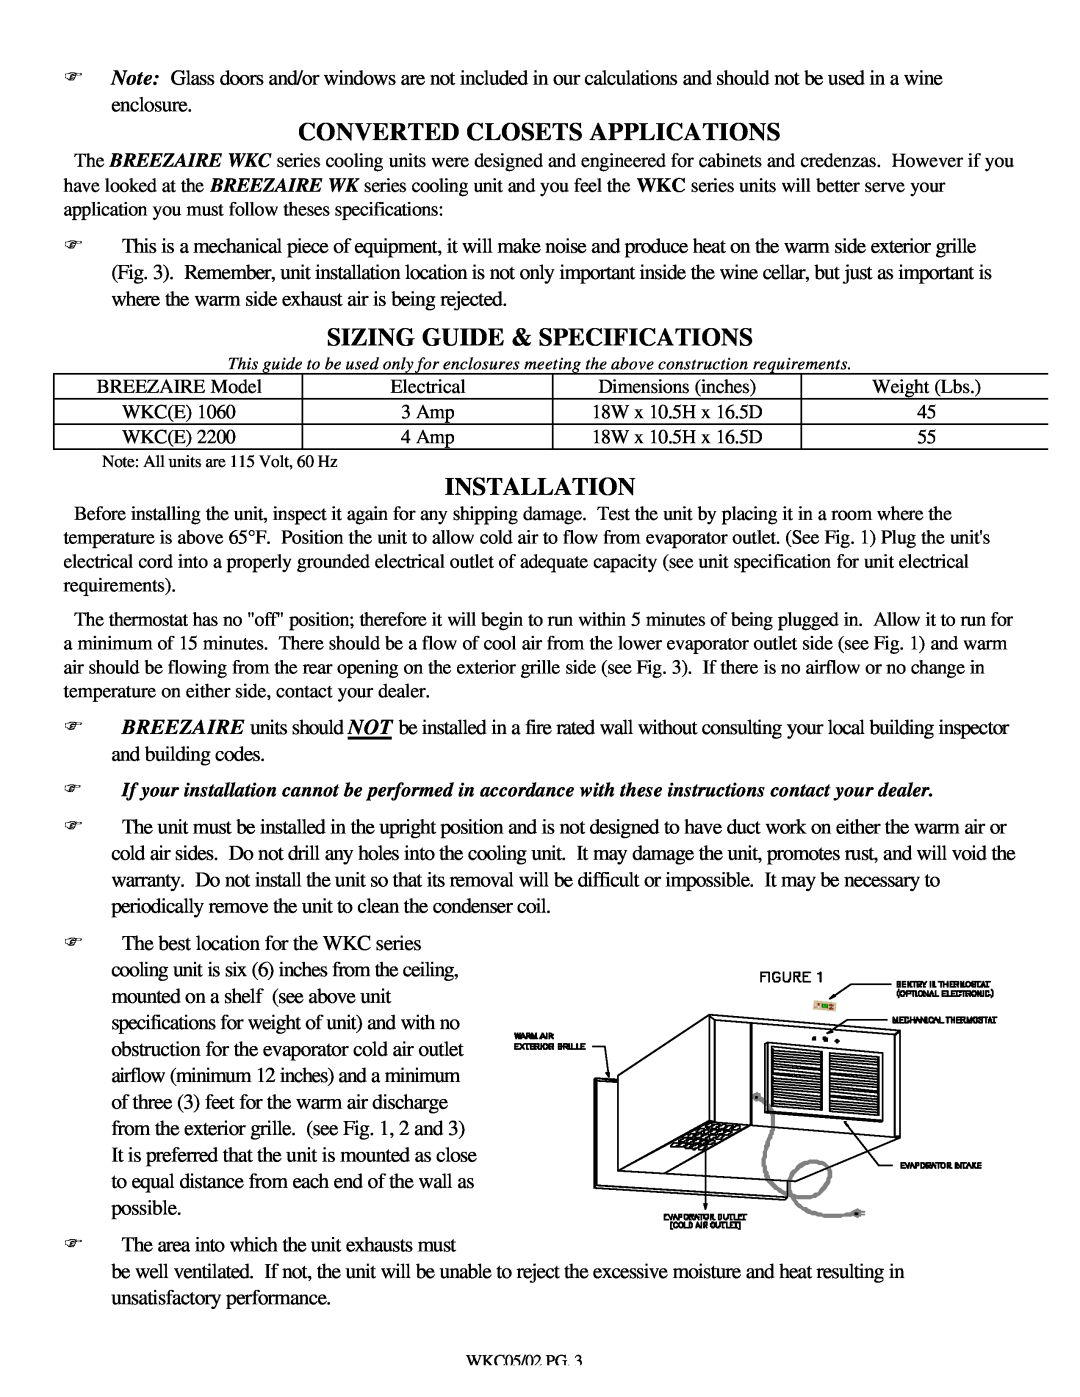 Breezaire WKC Series installation instructions Converted Closets Applications, Sizing Guide & Specifications, Installation 